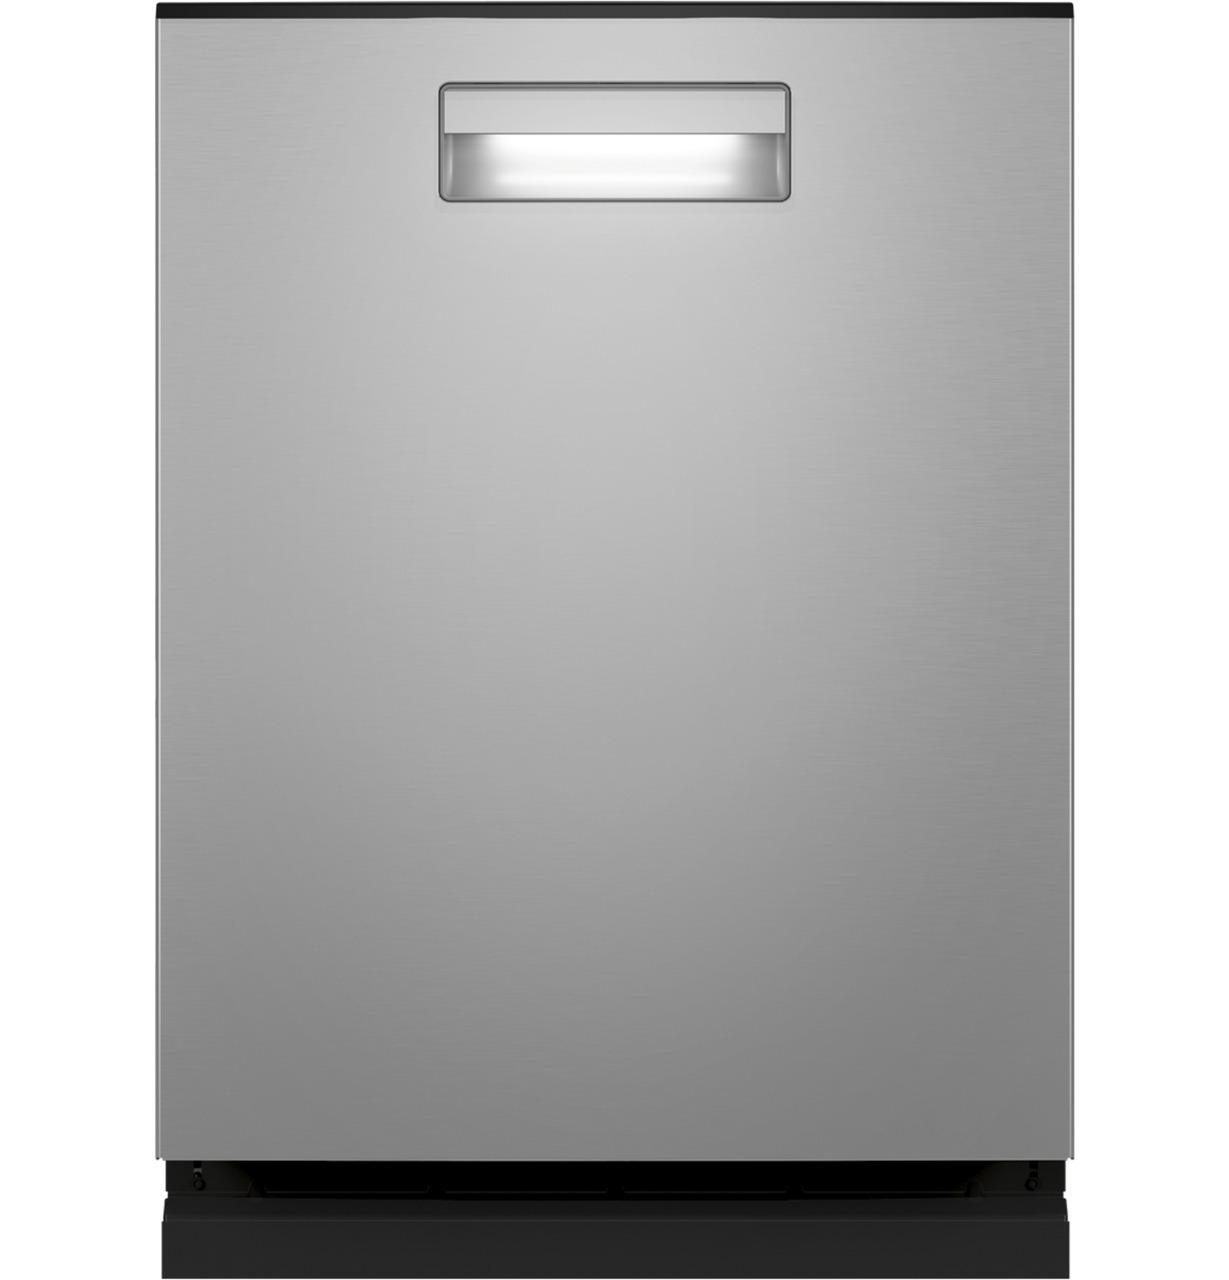 Haier ENERGY STAR® Smart Top Control with Stainless Steel Interior Dishwasher with Sanitize Cycle